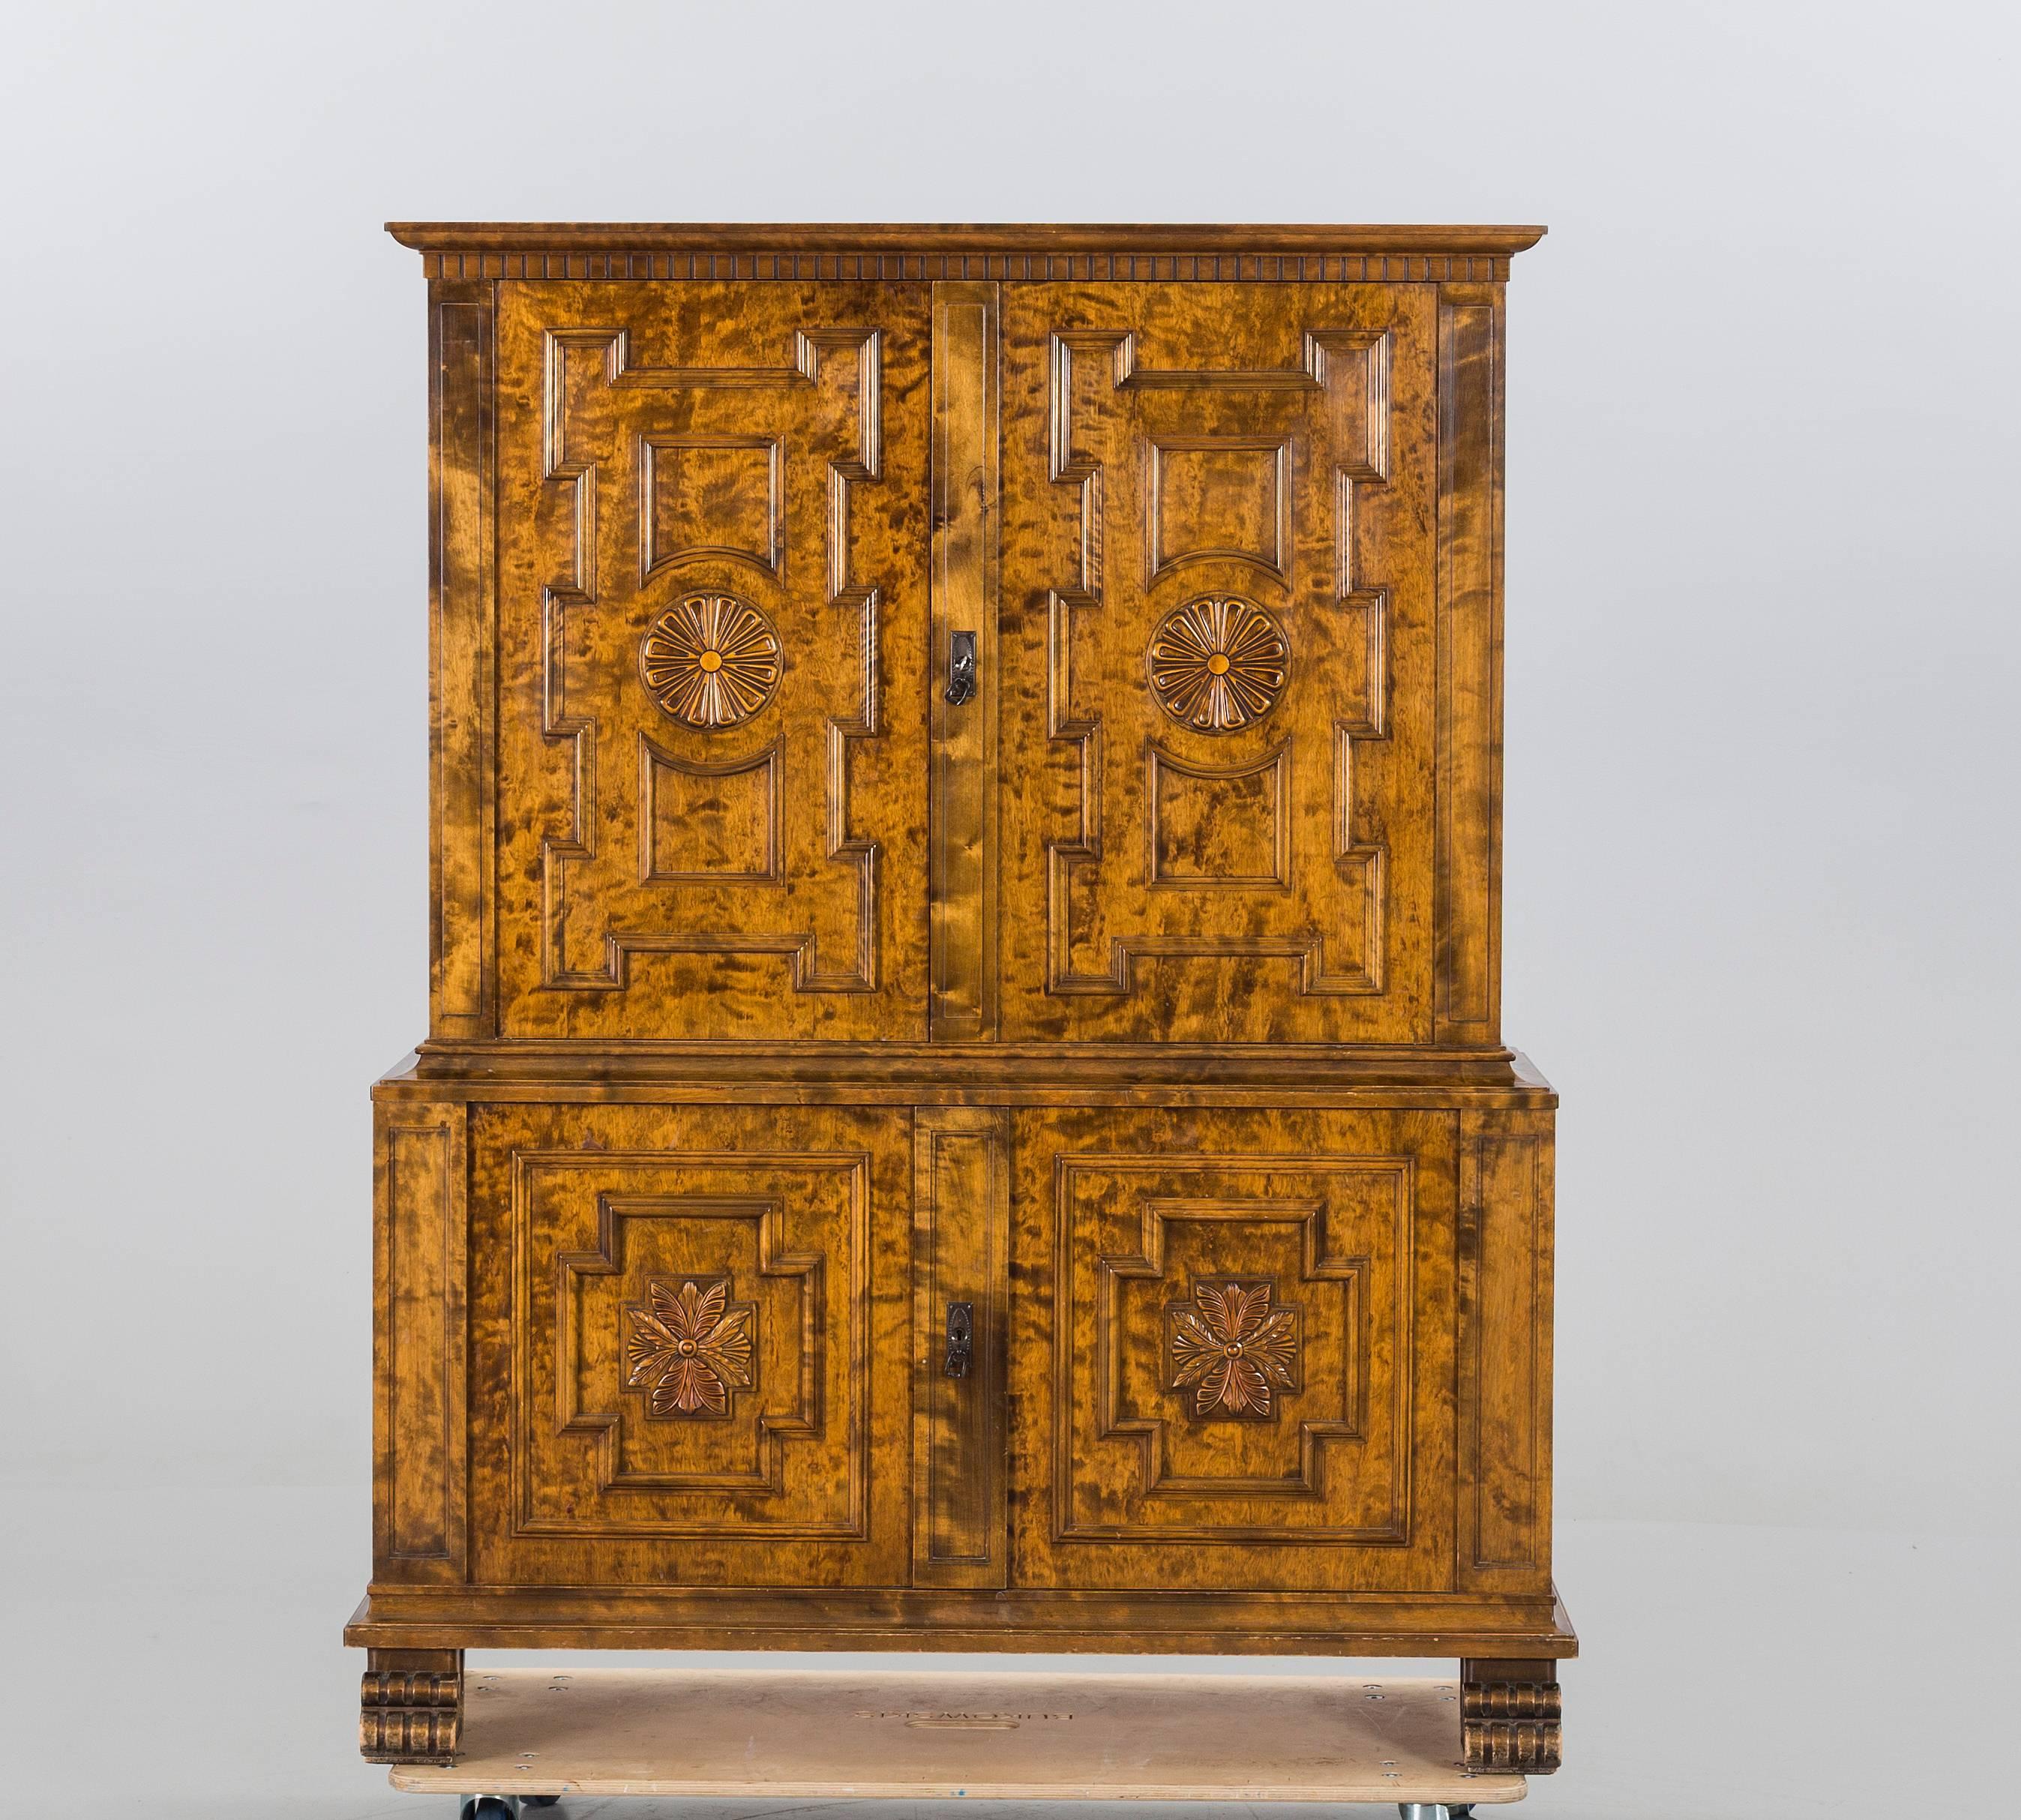 A beautiful cabinet attributed to Axel Einar Hjorth.